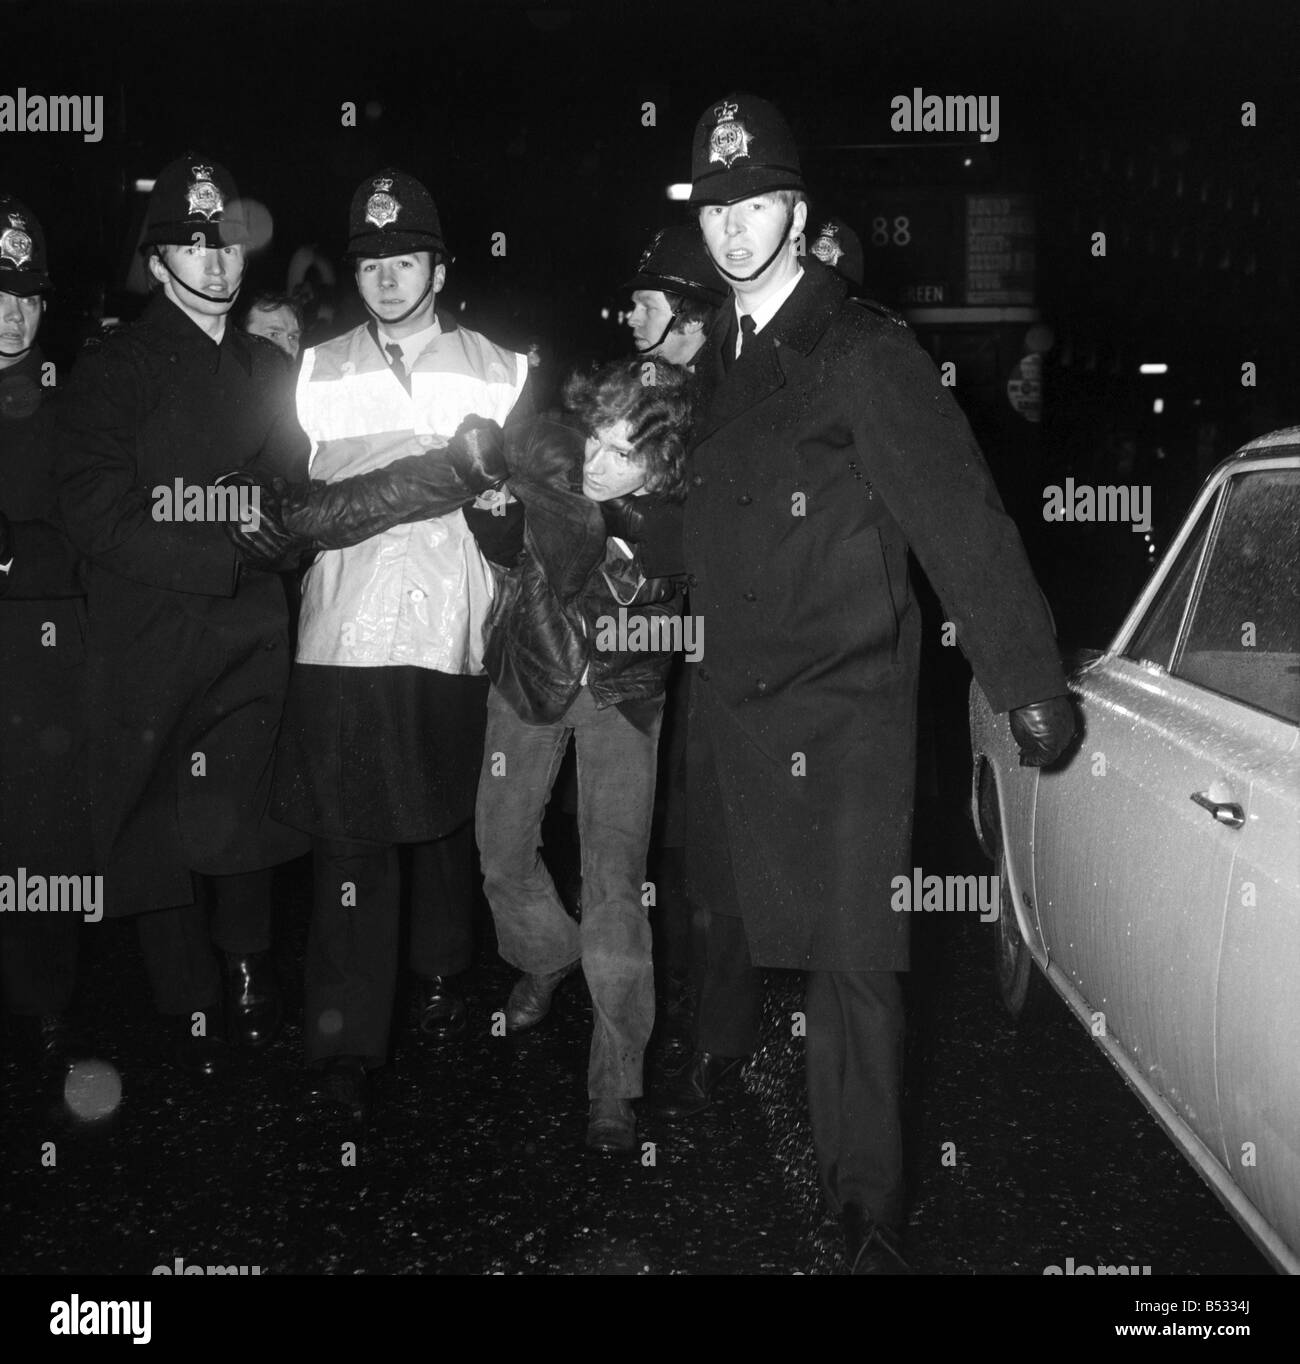 Bloody Sunday demonatration in Picadilly on the day victims of the shootings were buried in Londonderry.;A demonstrator is arrested by three policeman . February 1972 72-1093 Stock Photo